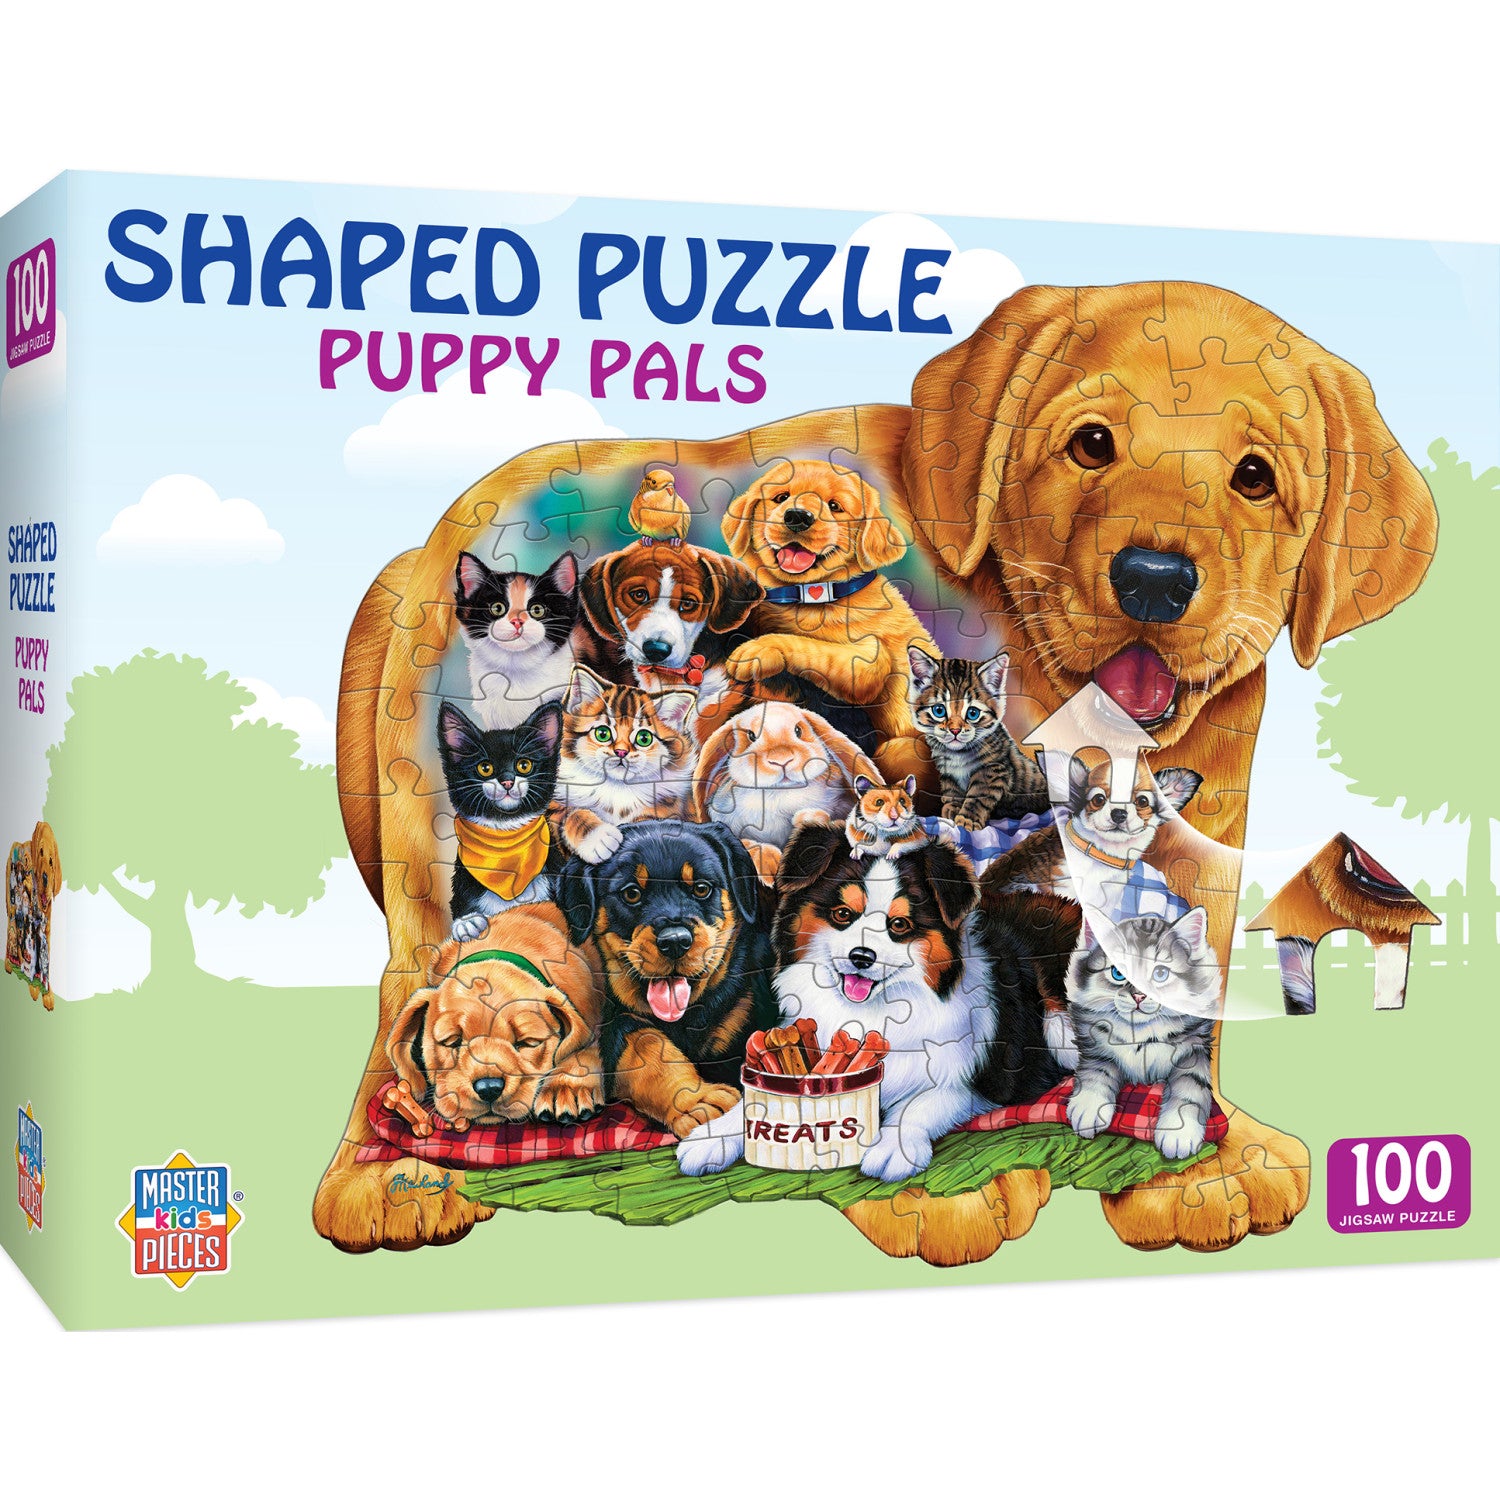 Puppy Pals - 100 Piece Shaped Jigsaw Puzzle